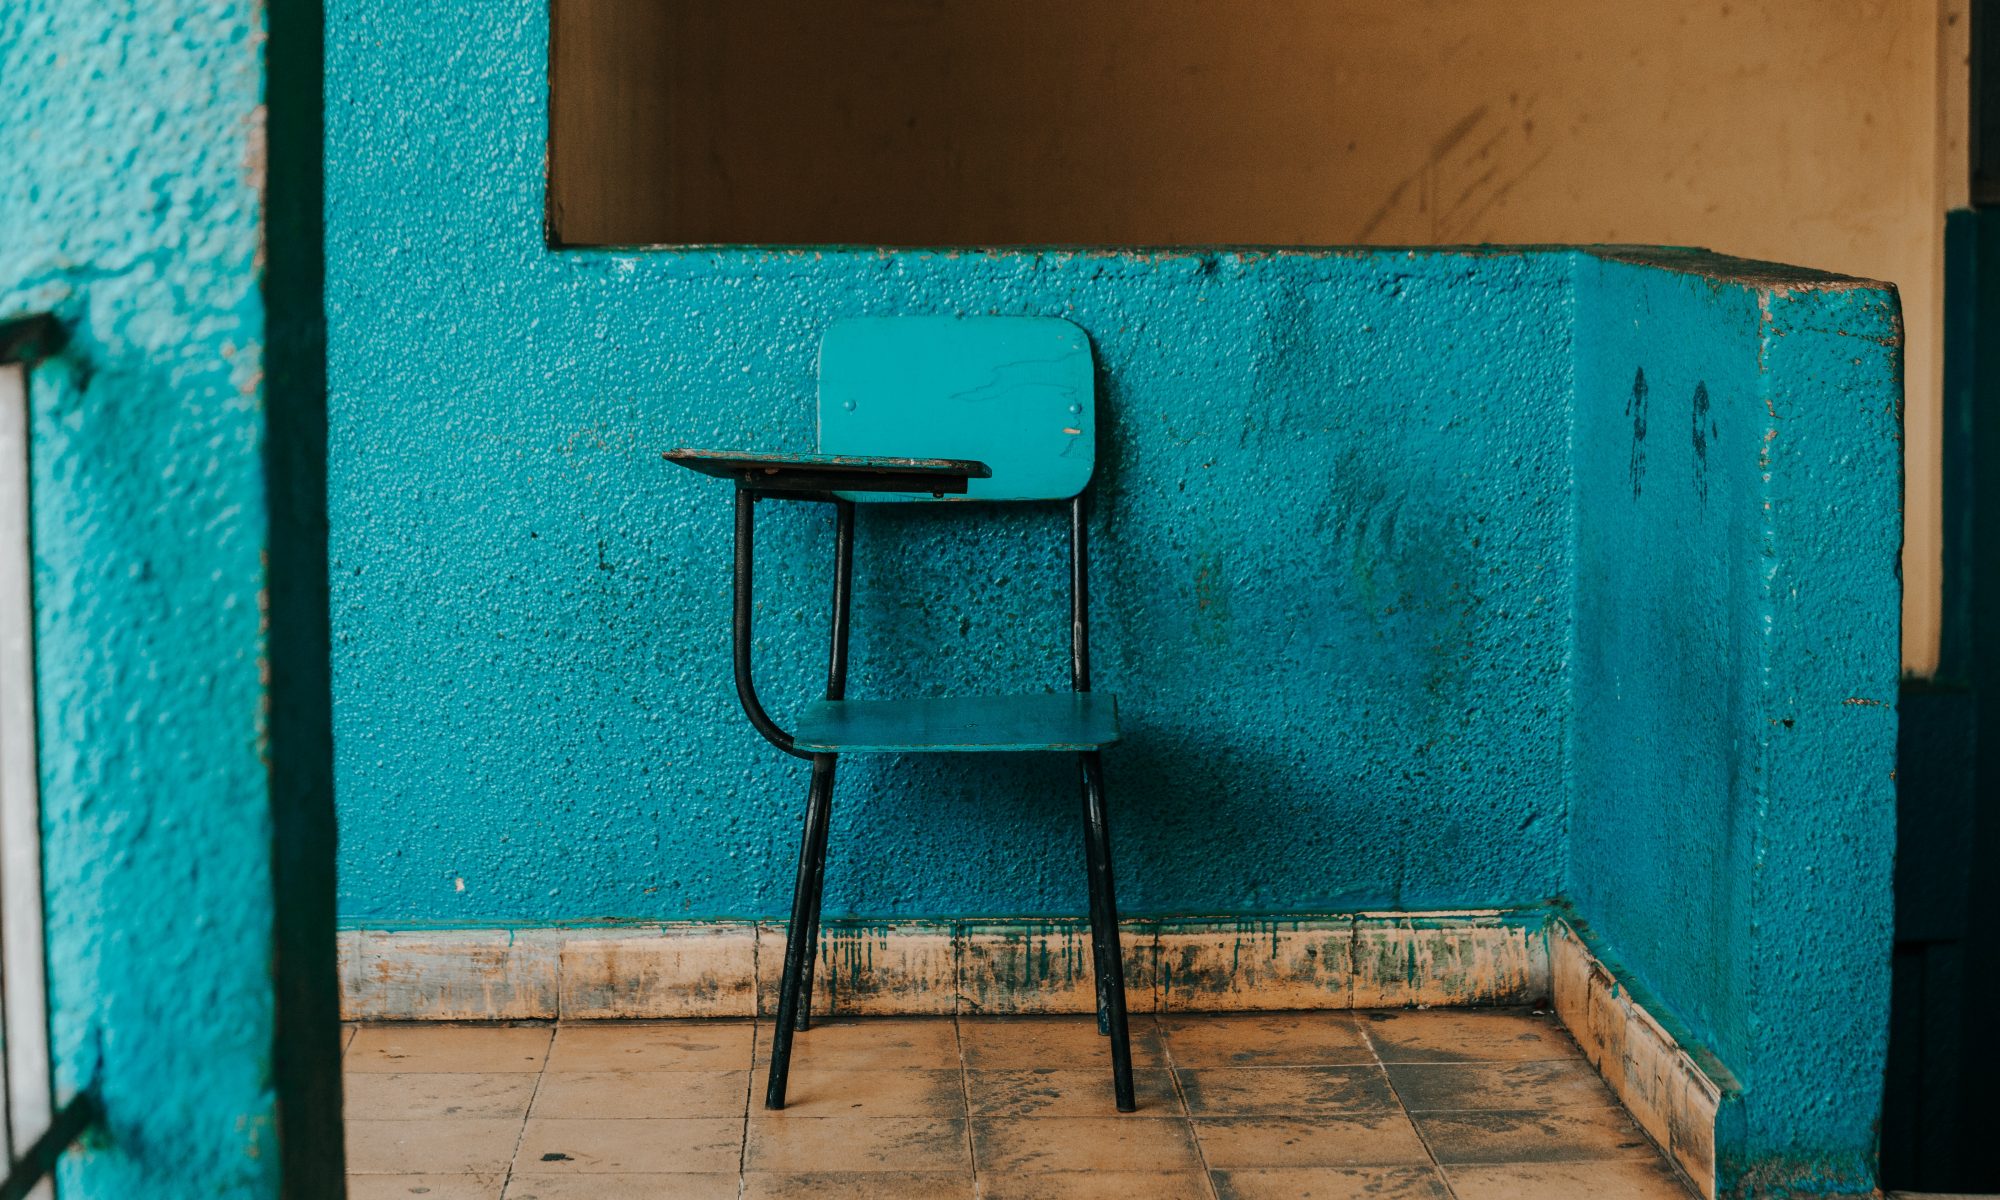 Old style school desk painted blue against a blue wall.